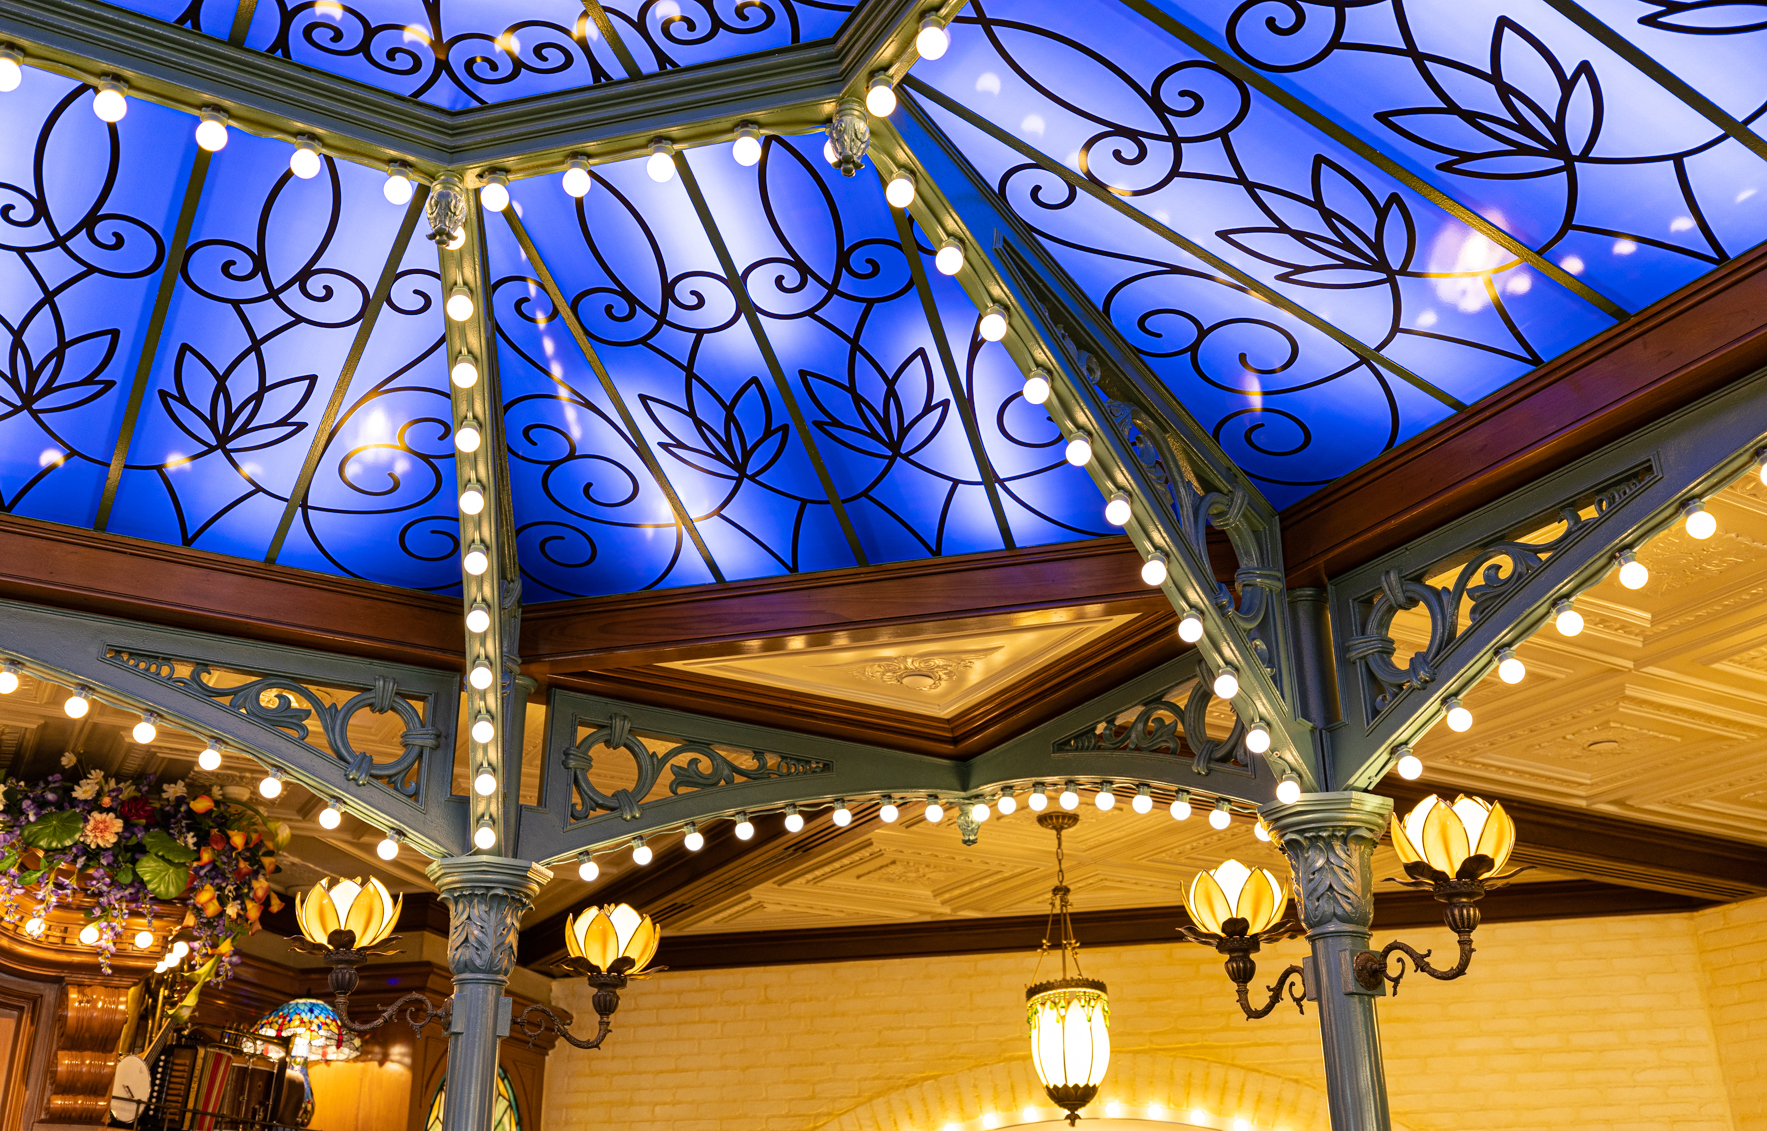 Guests will find a blue skylight inside Tiana’s Palace, which will open in New Orleans Square at Disneyland Park in Anaheim, Calif., on Sept. 7, 2023. Inspired by the Walt Disney Animation Studios film “The Princess and the Frog,” the reimagined quick service restaurant will serve authentic New Orleans flavors inspired by Tiana’s friends and adventures. While Tiana’s Palace is not a character dining location, guests may find Tiana in New Orleans Square. (Christian Thompson/Disneyland Resort)